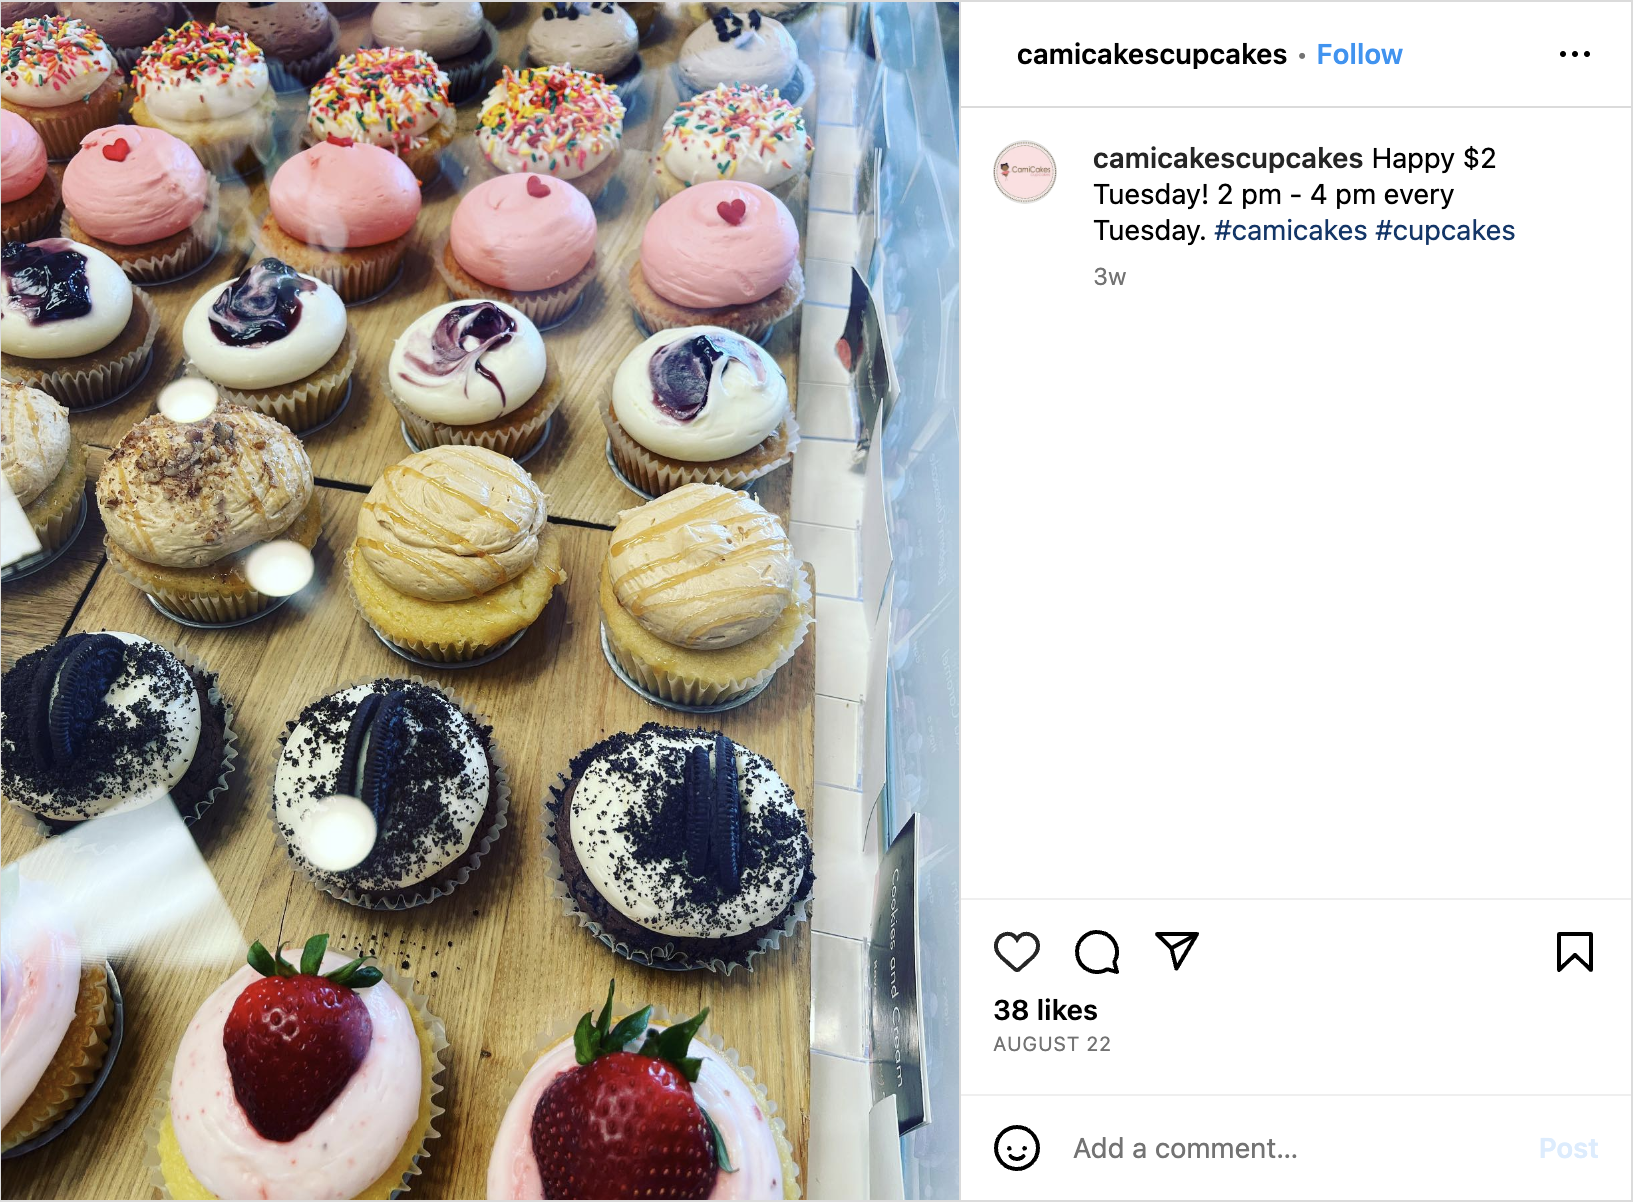 Cami Cake's Cupcakes Instagram post featuring an assortment of cupcakes. The caption reads, "Happy $2 Tuesday! 2 p.m. to 4 p.m. every Tuesday. #camicakes #cupcakes."